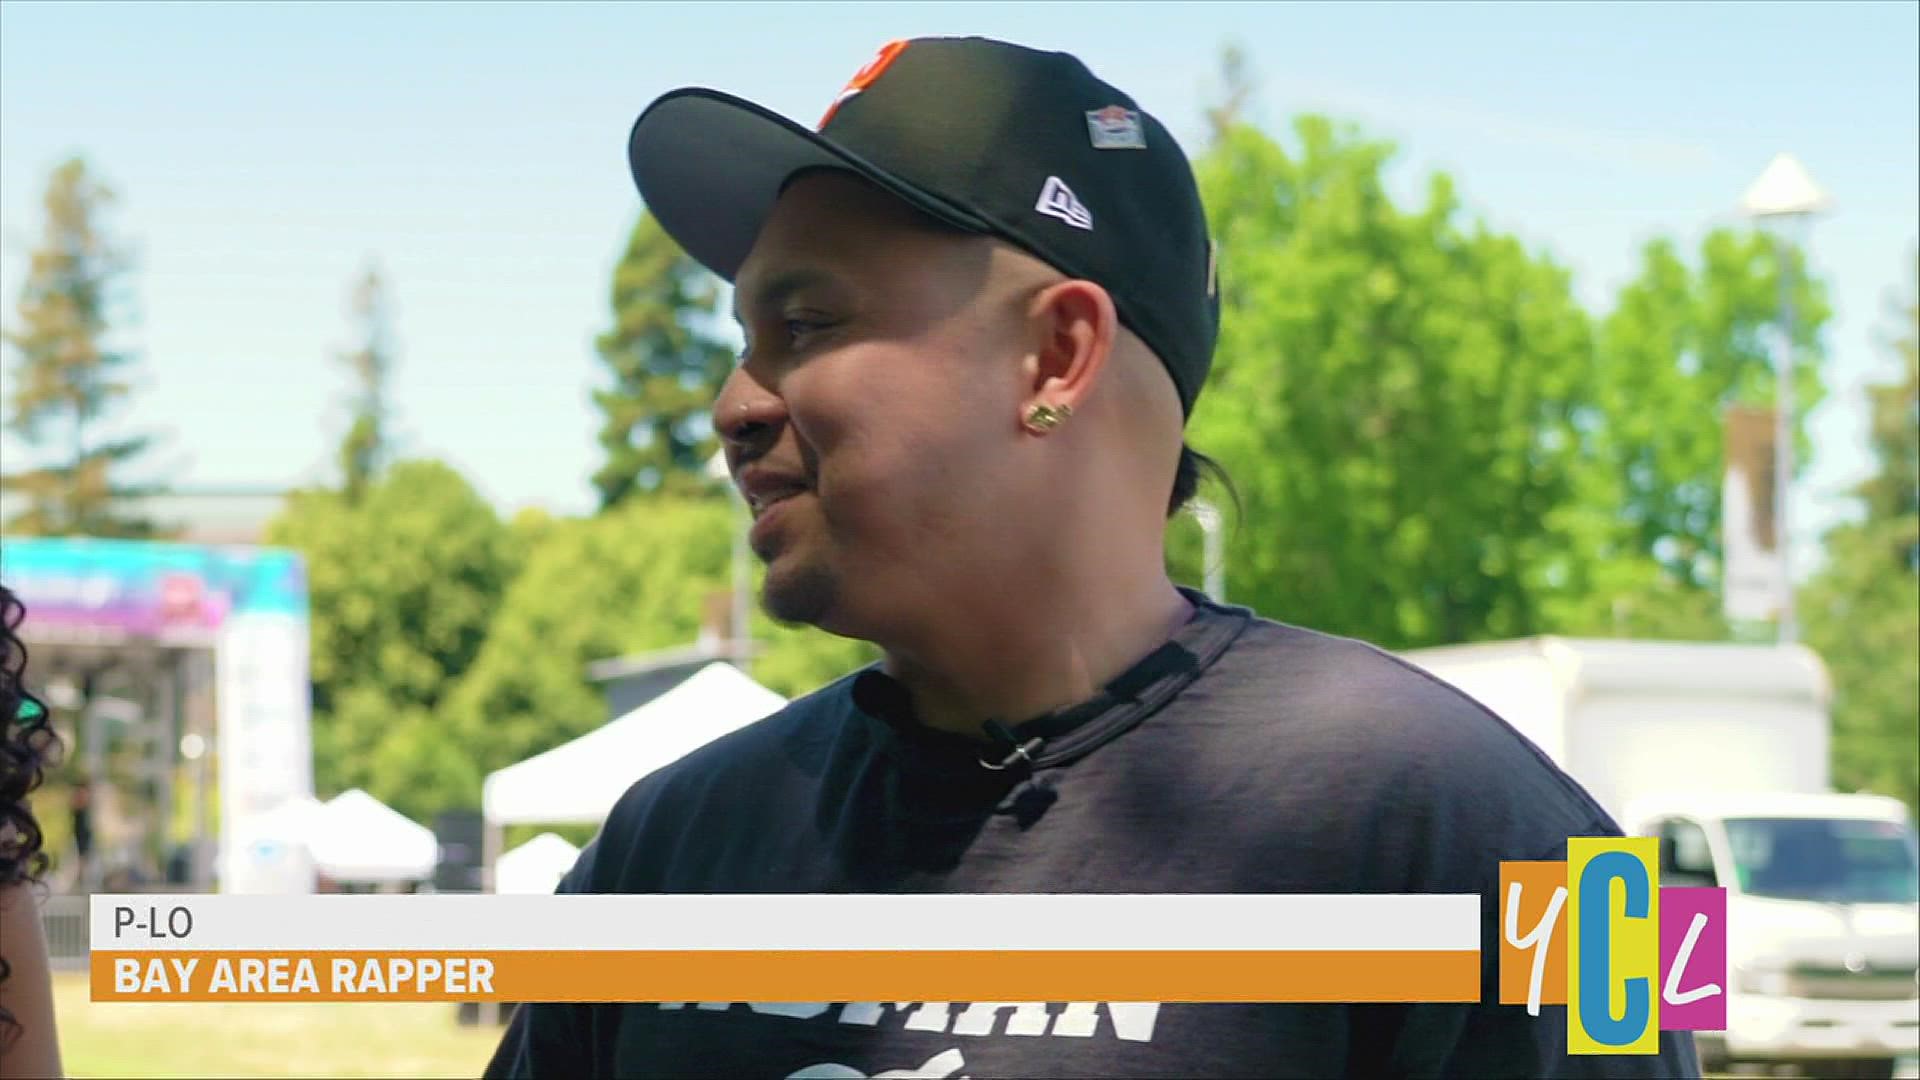 The first ever APPI Night market was a success in Sacramento. We got to catch up with bay area rapper P-Lo before hitting the stage for the sold out event.